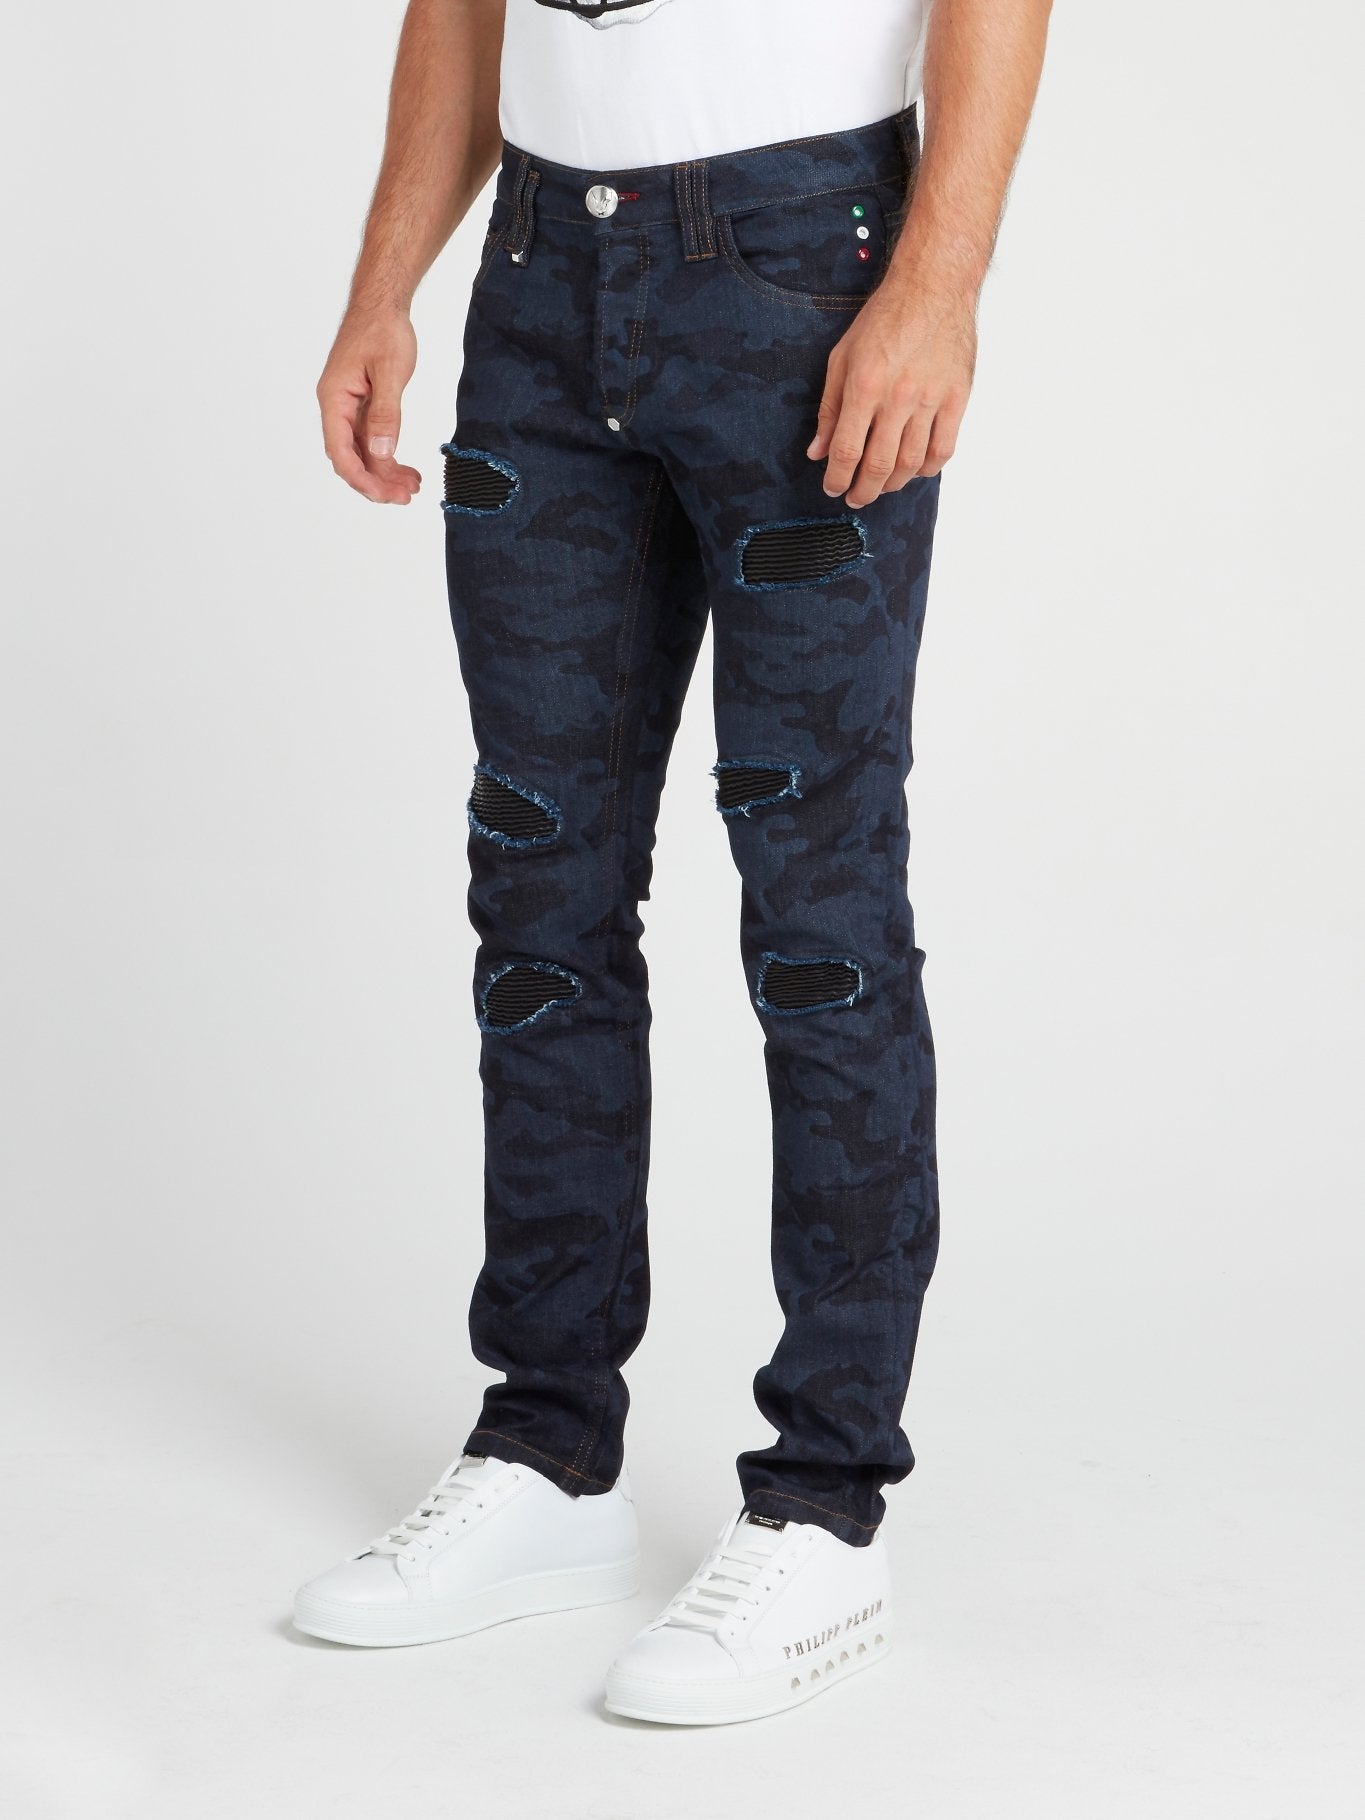 Navy Camo Distressed Jeans